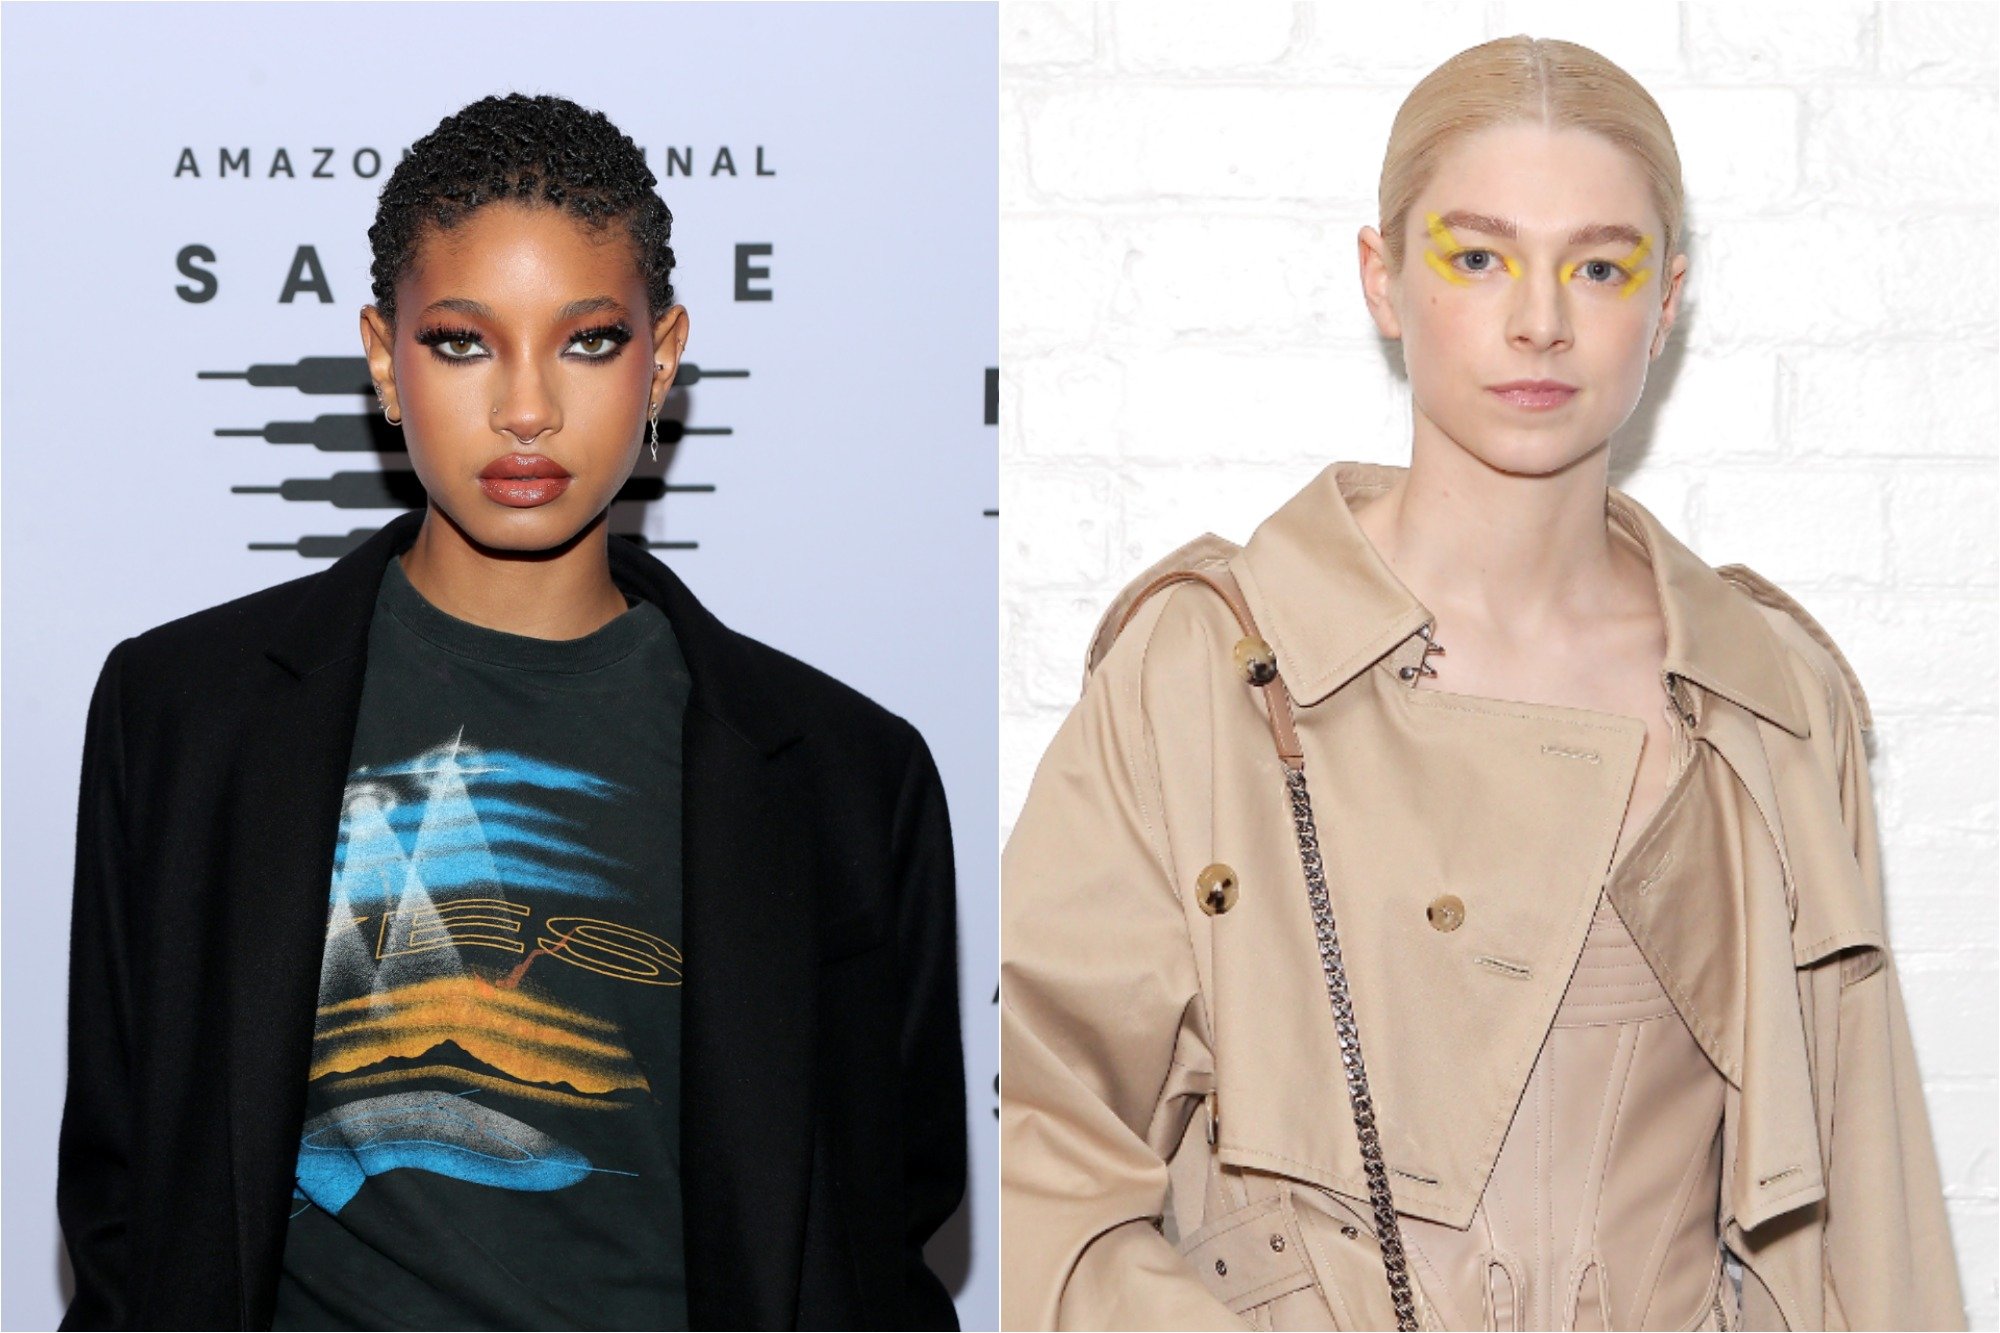 Willow Smith at Rihanna's Savage X Fenty Show Vol. 2 presented by Amazon Prime Video on Oct. 2, 2020 / Hunter Schafer at the Burberry Autumn/Winter 2020 show on Feb. 17, 2020